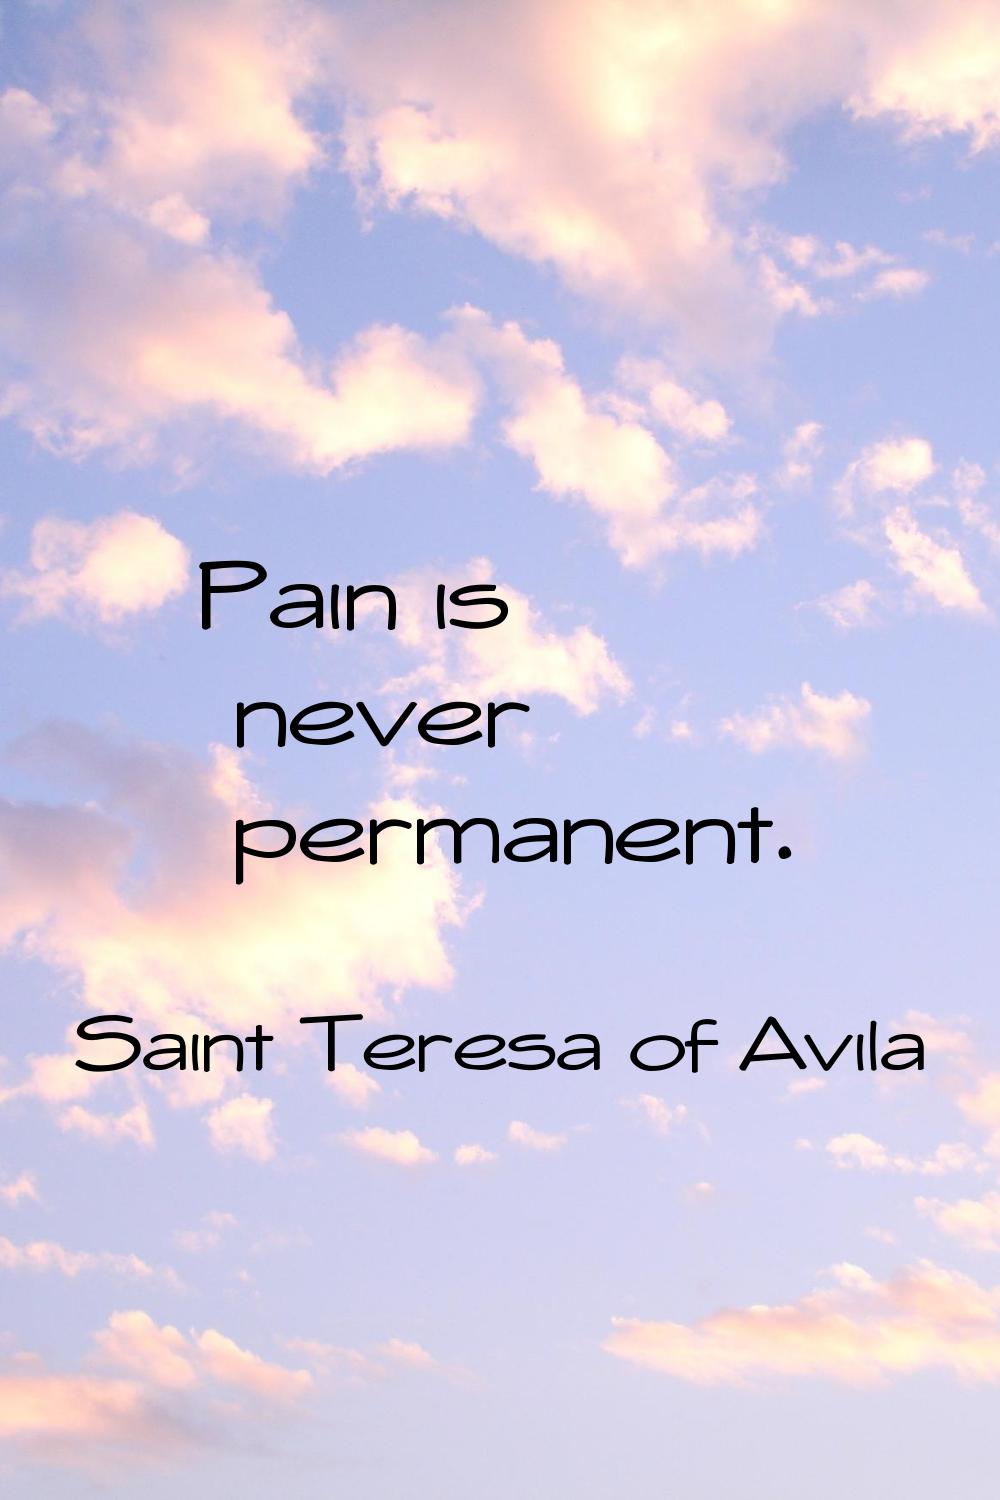 Pain is never permanent.